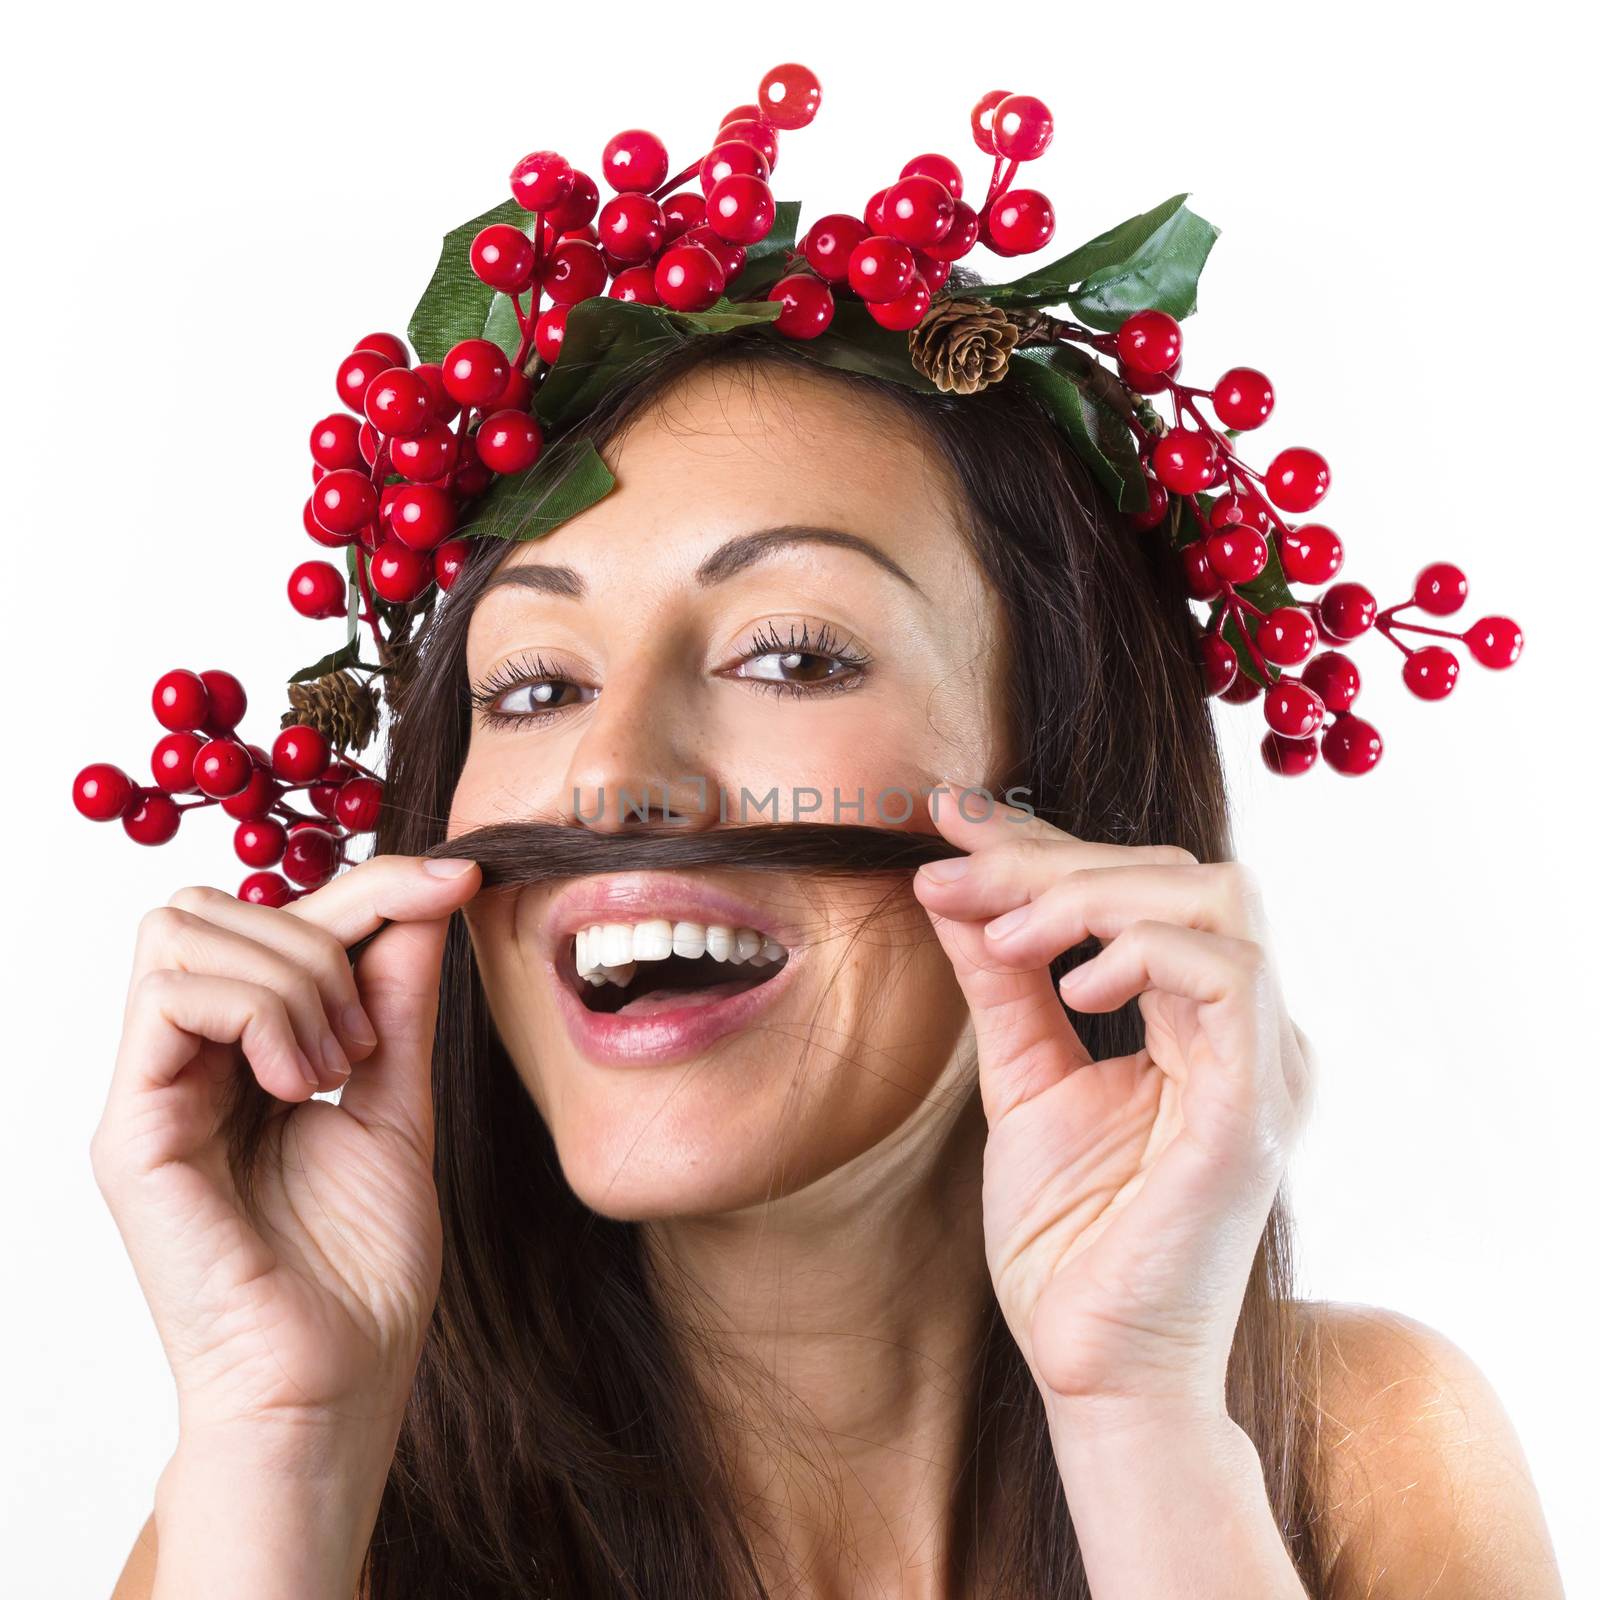 Smiling woman with a christmas wreath on her head, playing with by germanopoli